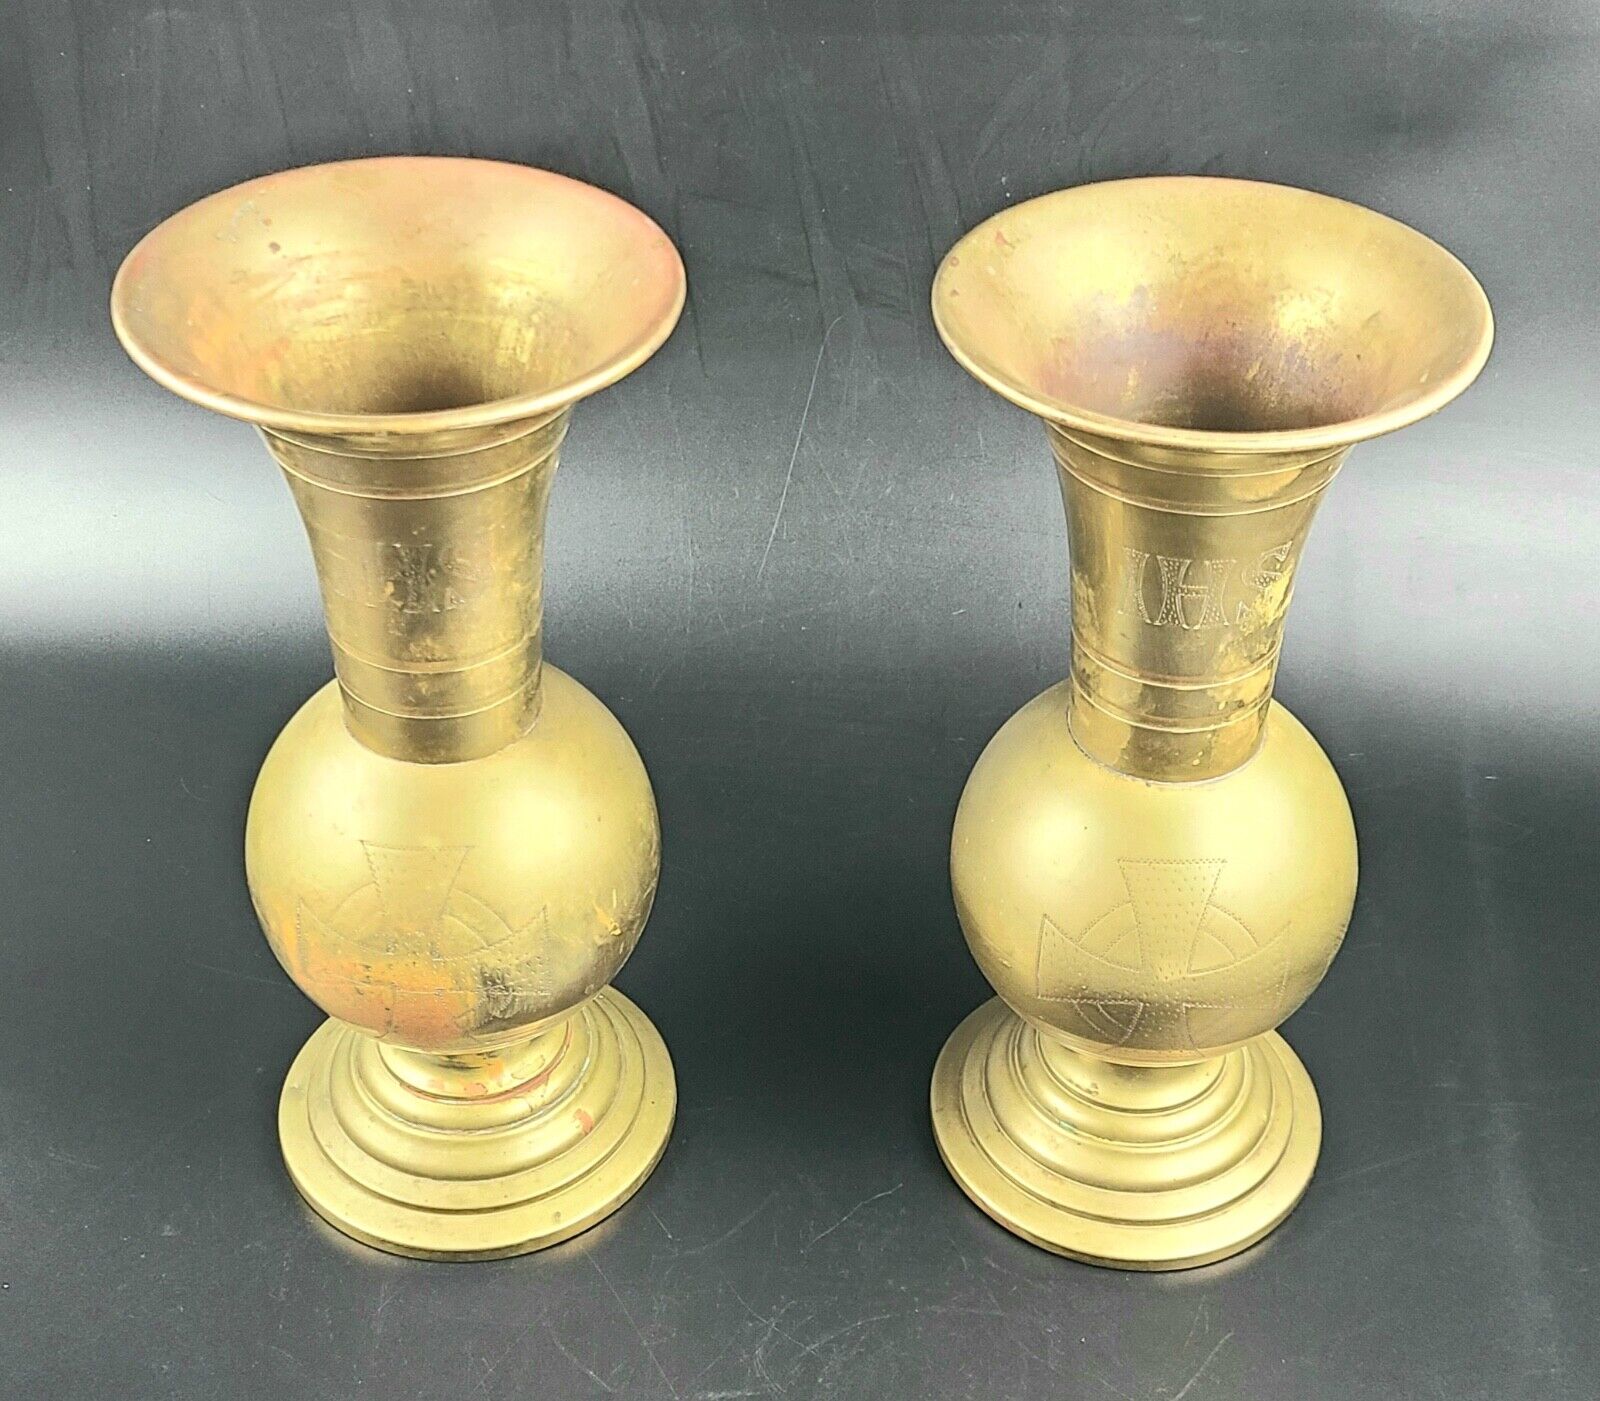 Antique - Brass Vases with Etched IHS and Alter Cross Signs/Symbols - Pair